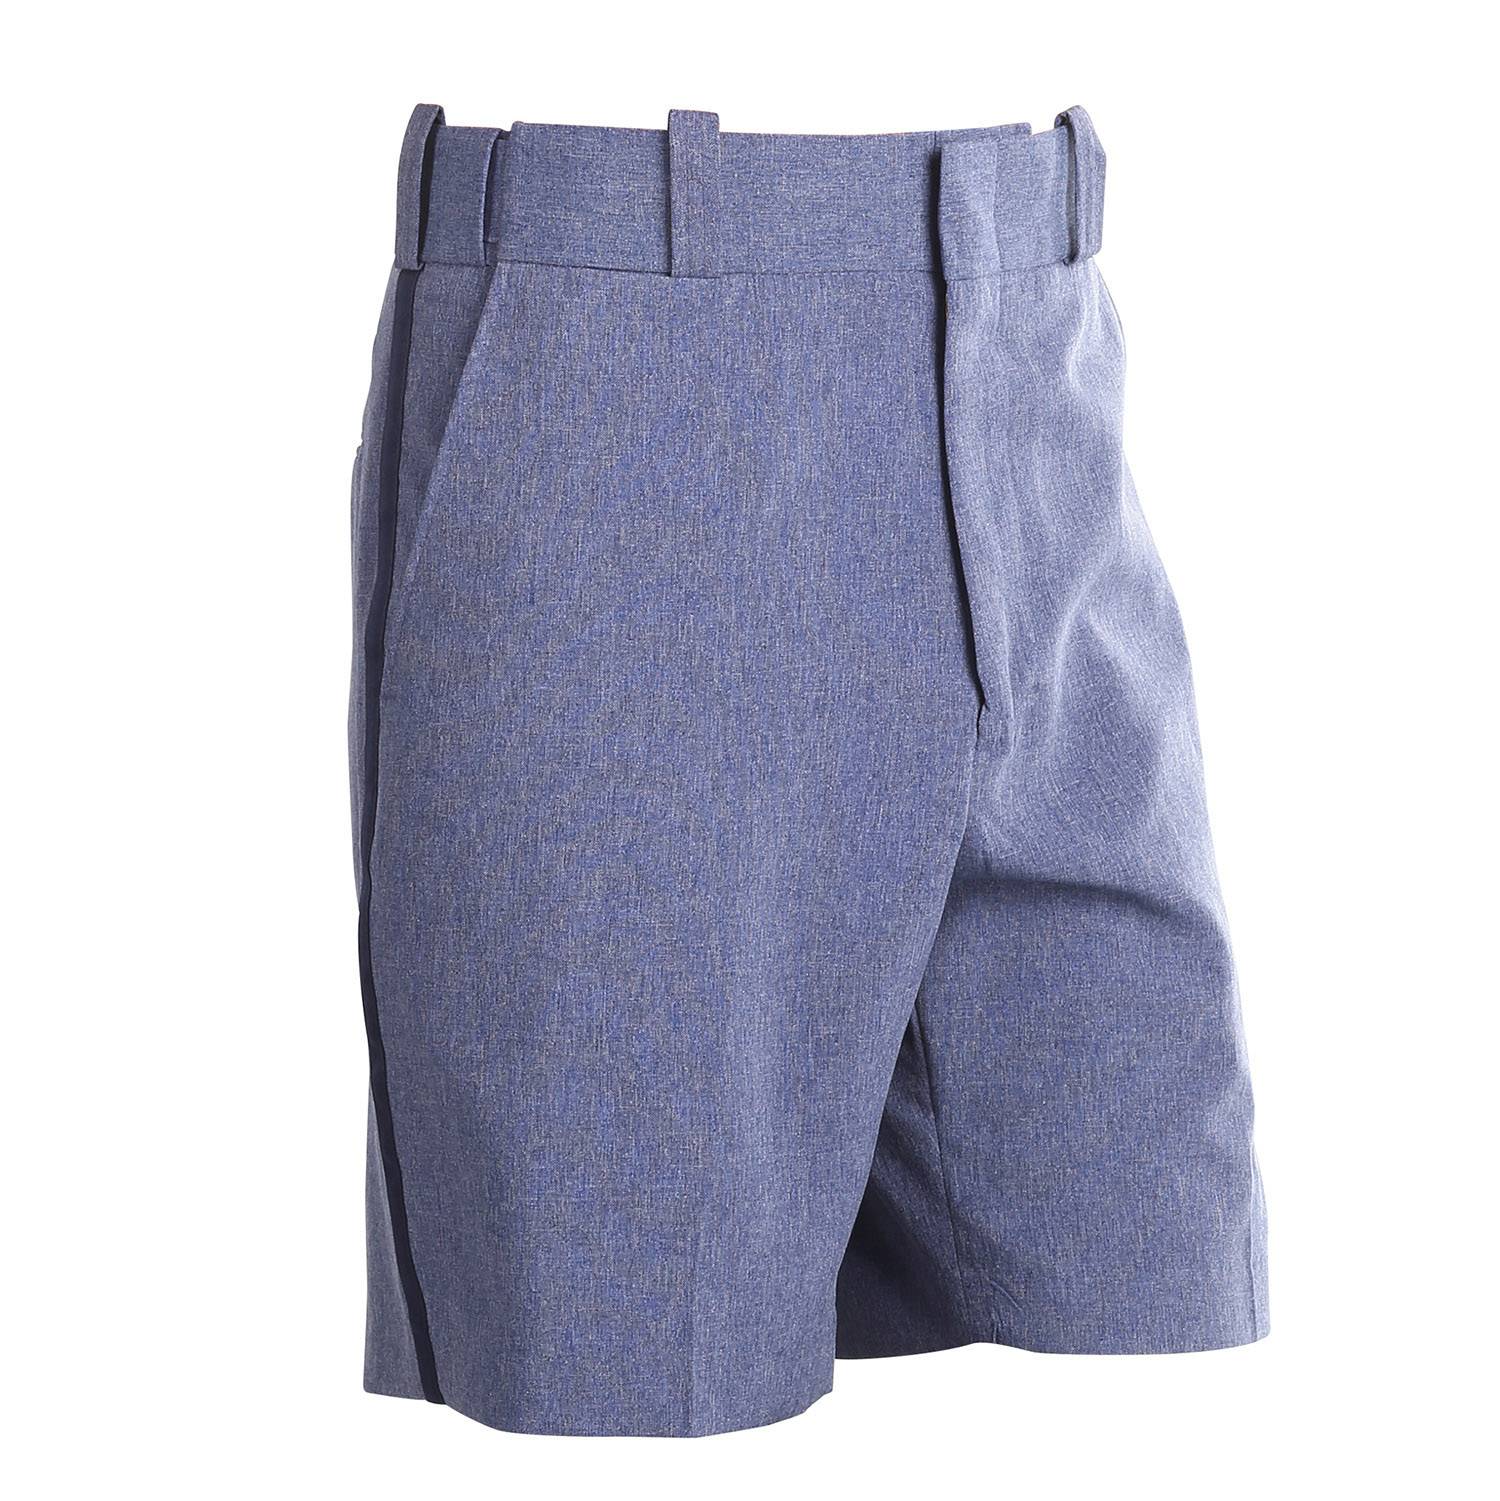 Flex Waist Postal Shorts for Carriers and MVS (PX265)